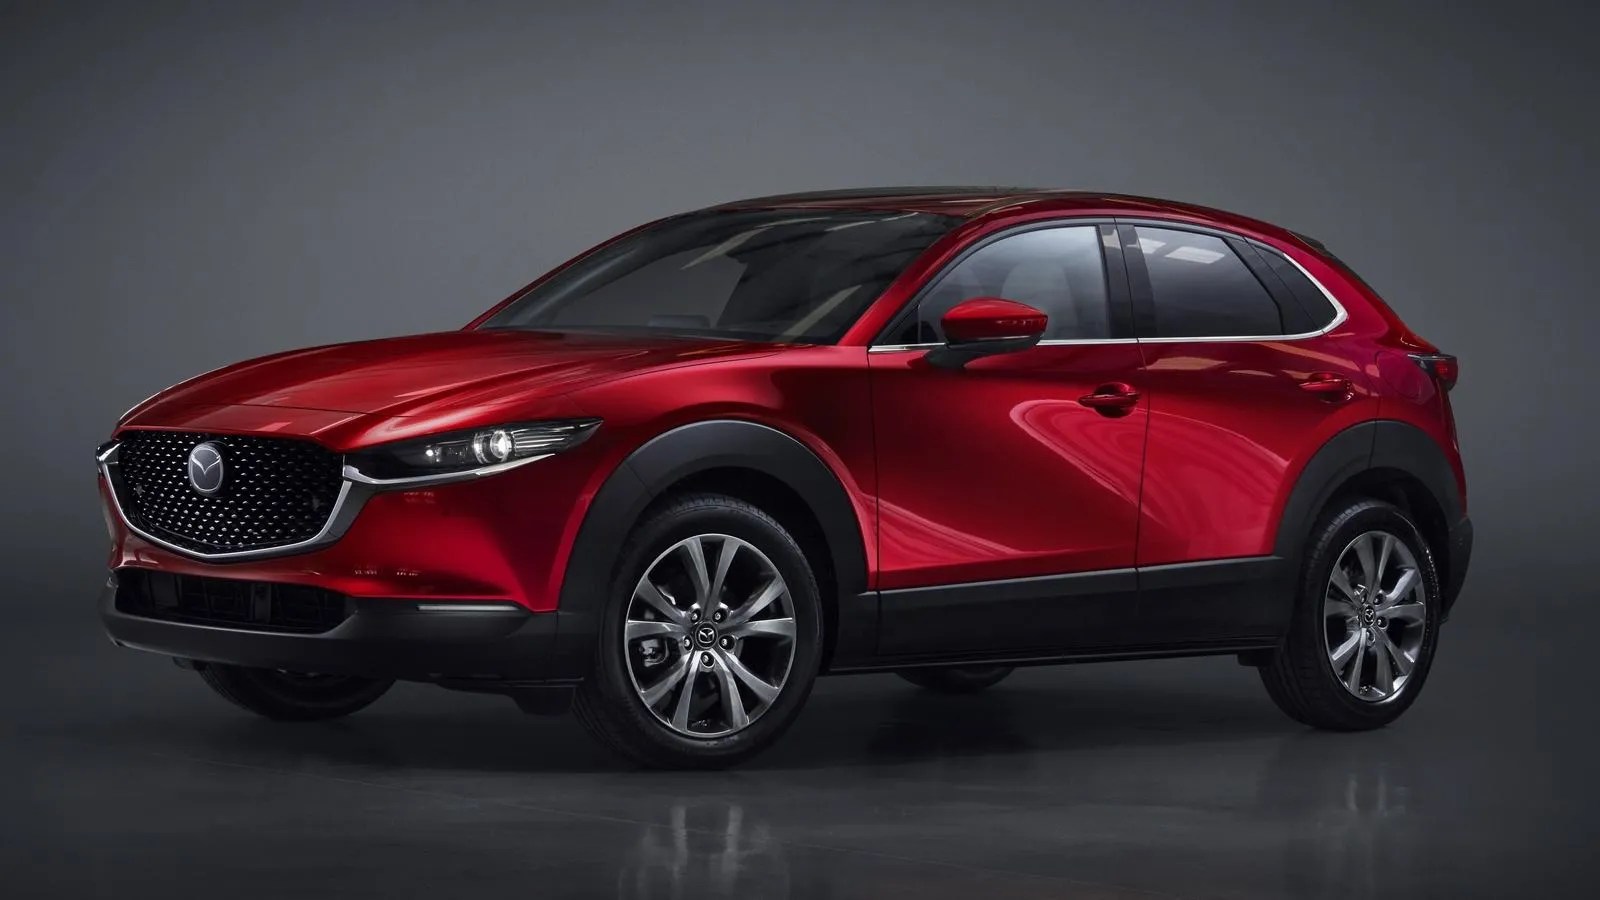 Styled with kodo design principles, character lines have been minimised in favour of surfaces that catch the light. 2019 Mazda CX-30 Broadens Mazda's Crossover Range | Top Speed